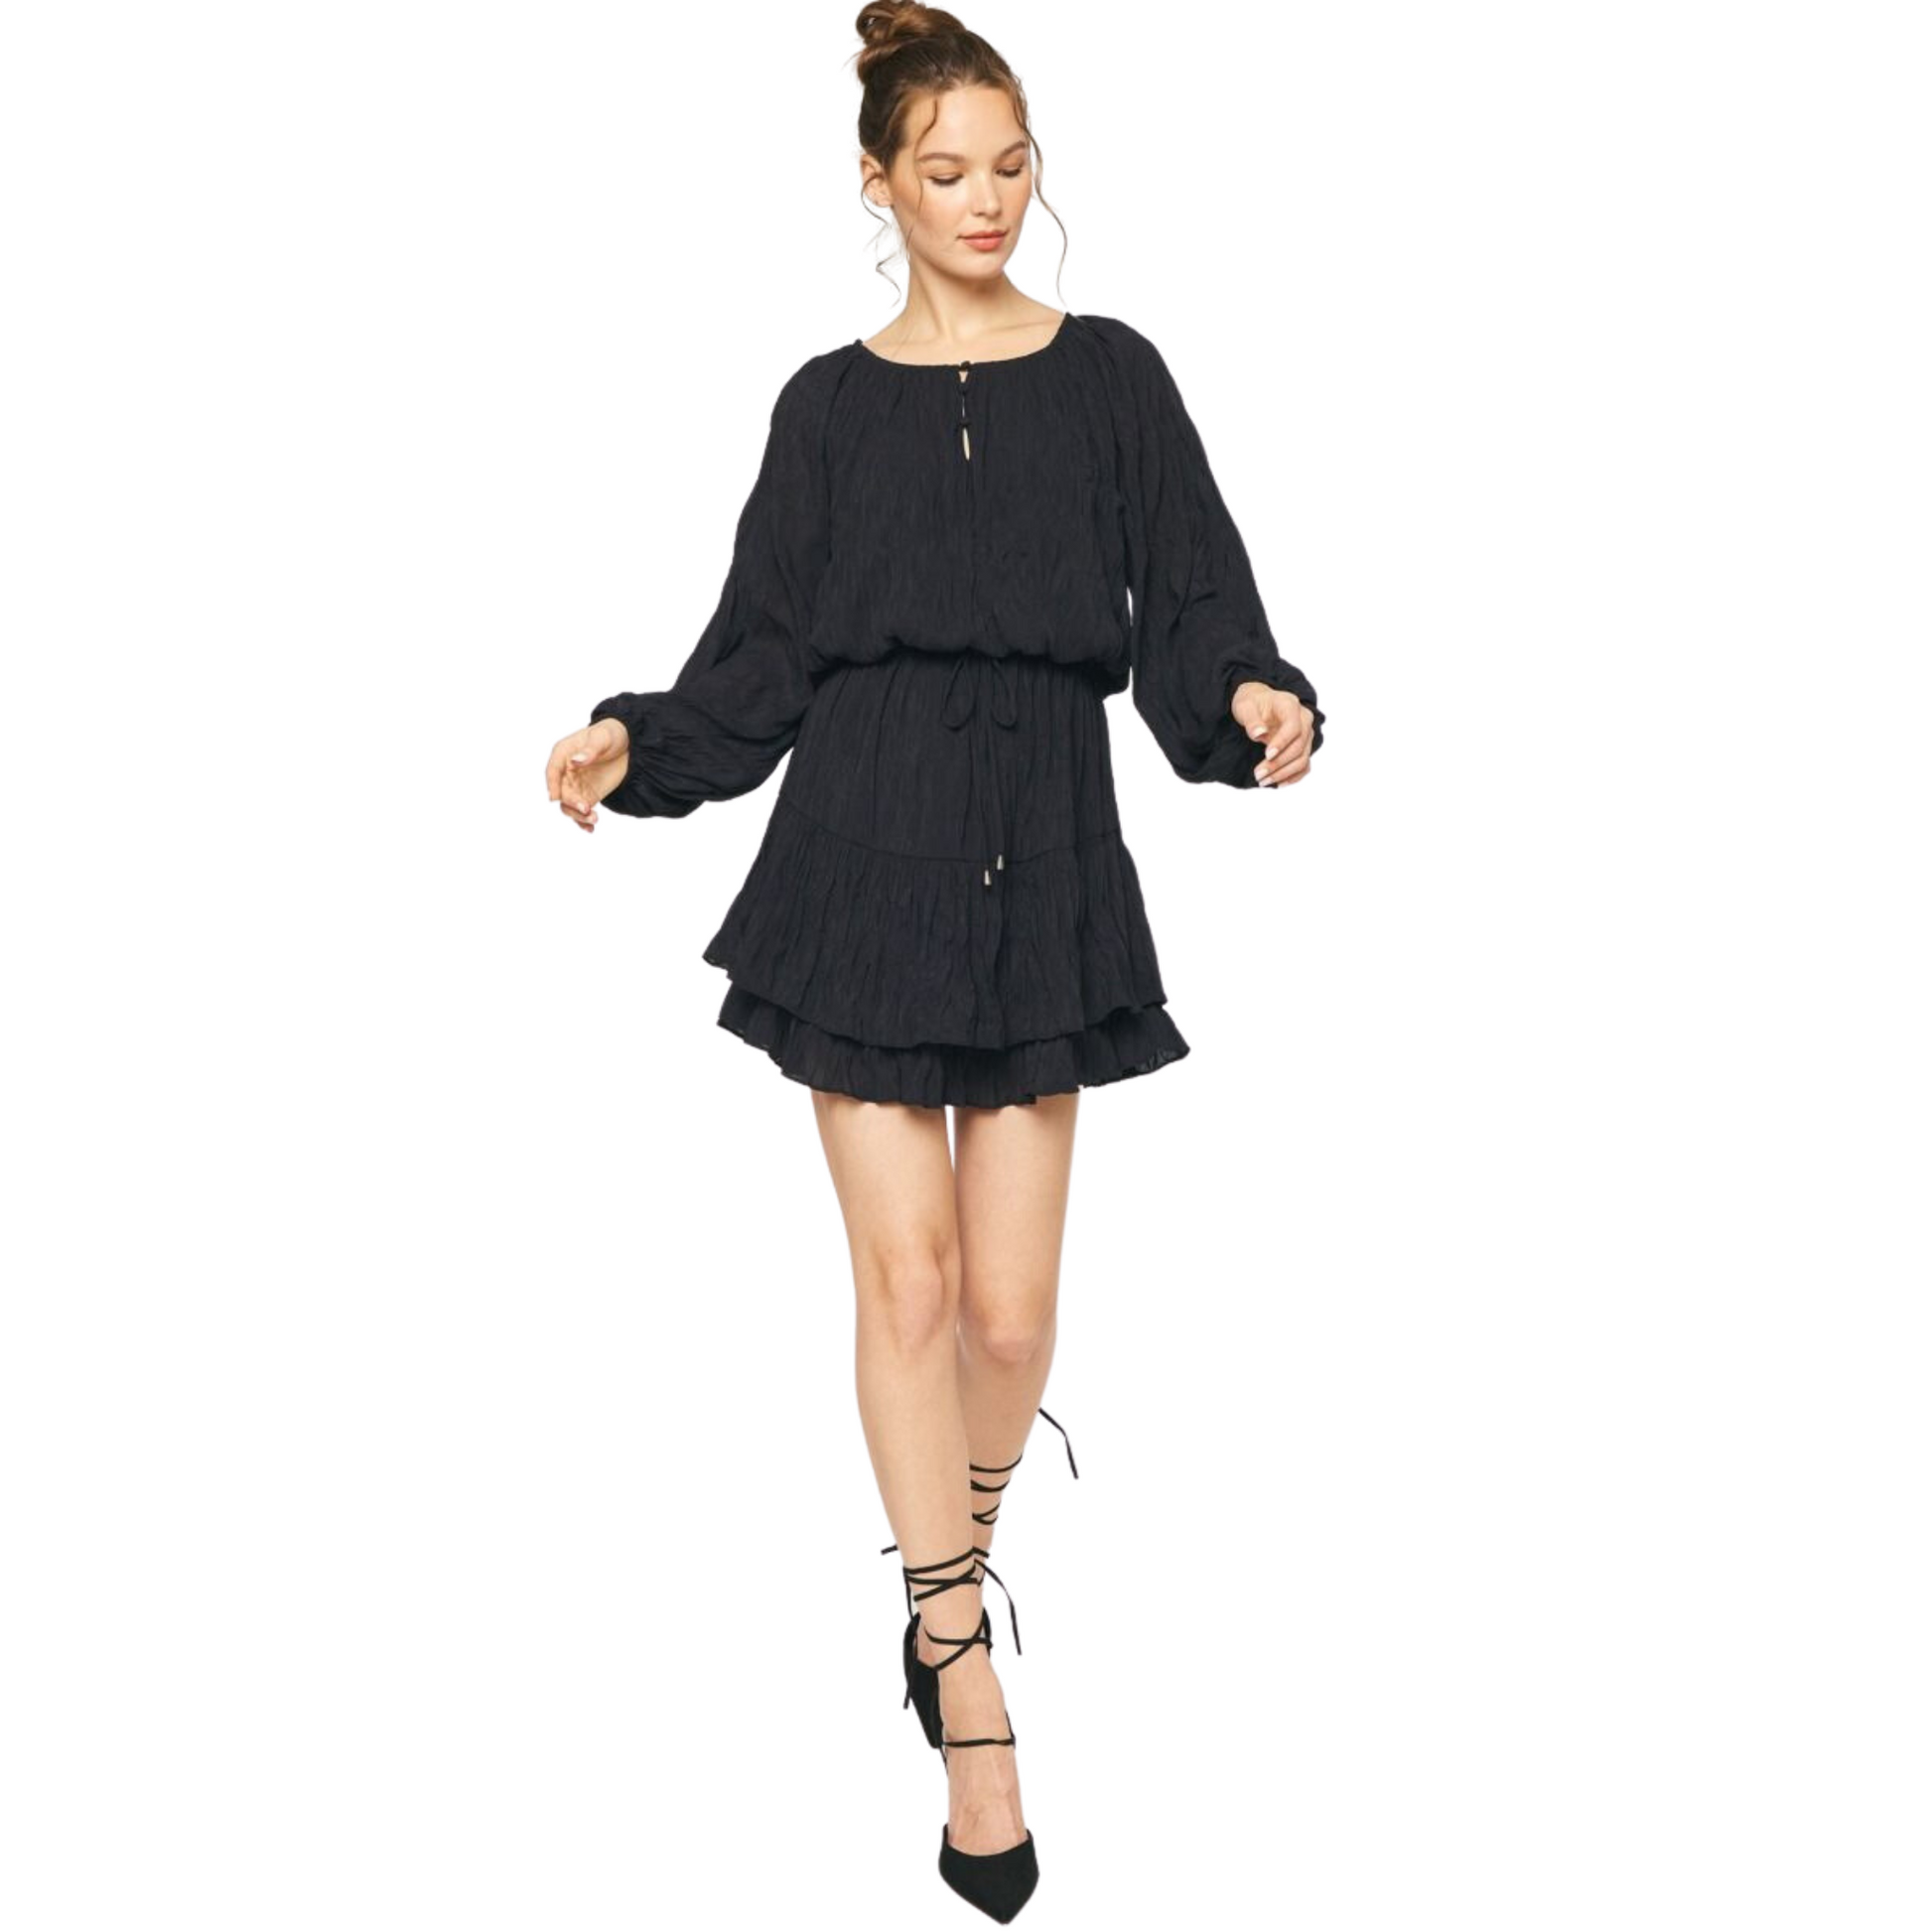 This fashionable long sleeve mini dress is perfect for any occasion. Crafted with textured fabric in classic black and featuring a stylish ruffled hem, a self-tie waist detail and a button-up front, this mini dress will look great on any figure. Lightweight and non-sheer, the dress is also fully lined for a comfortable fit.